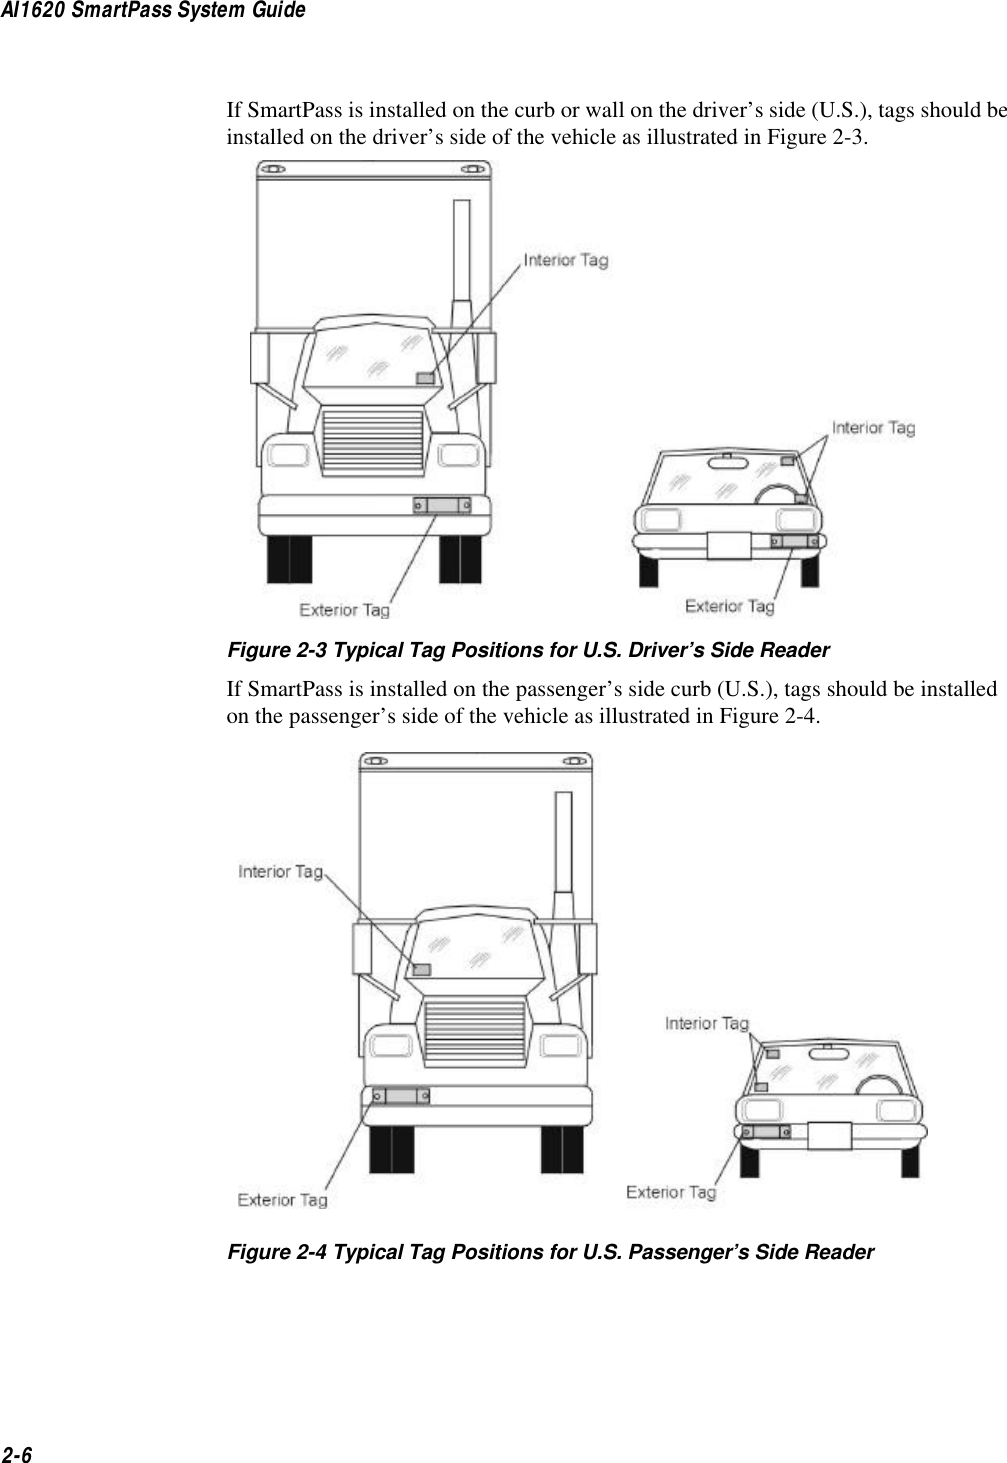 AI1620 SmartPass System Guide2-6If SmartPass is installed on the curb or wall on the driver’s side (U.S.), tags should be installed on the driver’s side of the vehicle as illustrated in Figure 2-3.Figure 2-3 Typical Tag Positions for U.S. Driver’s Side ReaderIf SmartPass is installed on the passenger’s side curb (U.S.), tags should be installed on the passenger’s side of the vehicle as illustrated in Figure 2-4.Figure 2-4 Typical Tag Positions for U.S. Passenger’s Side Reader